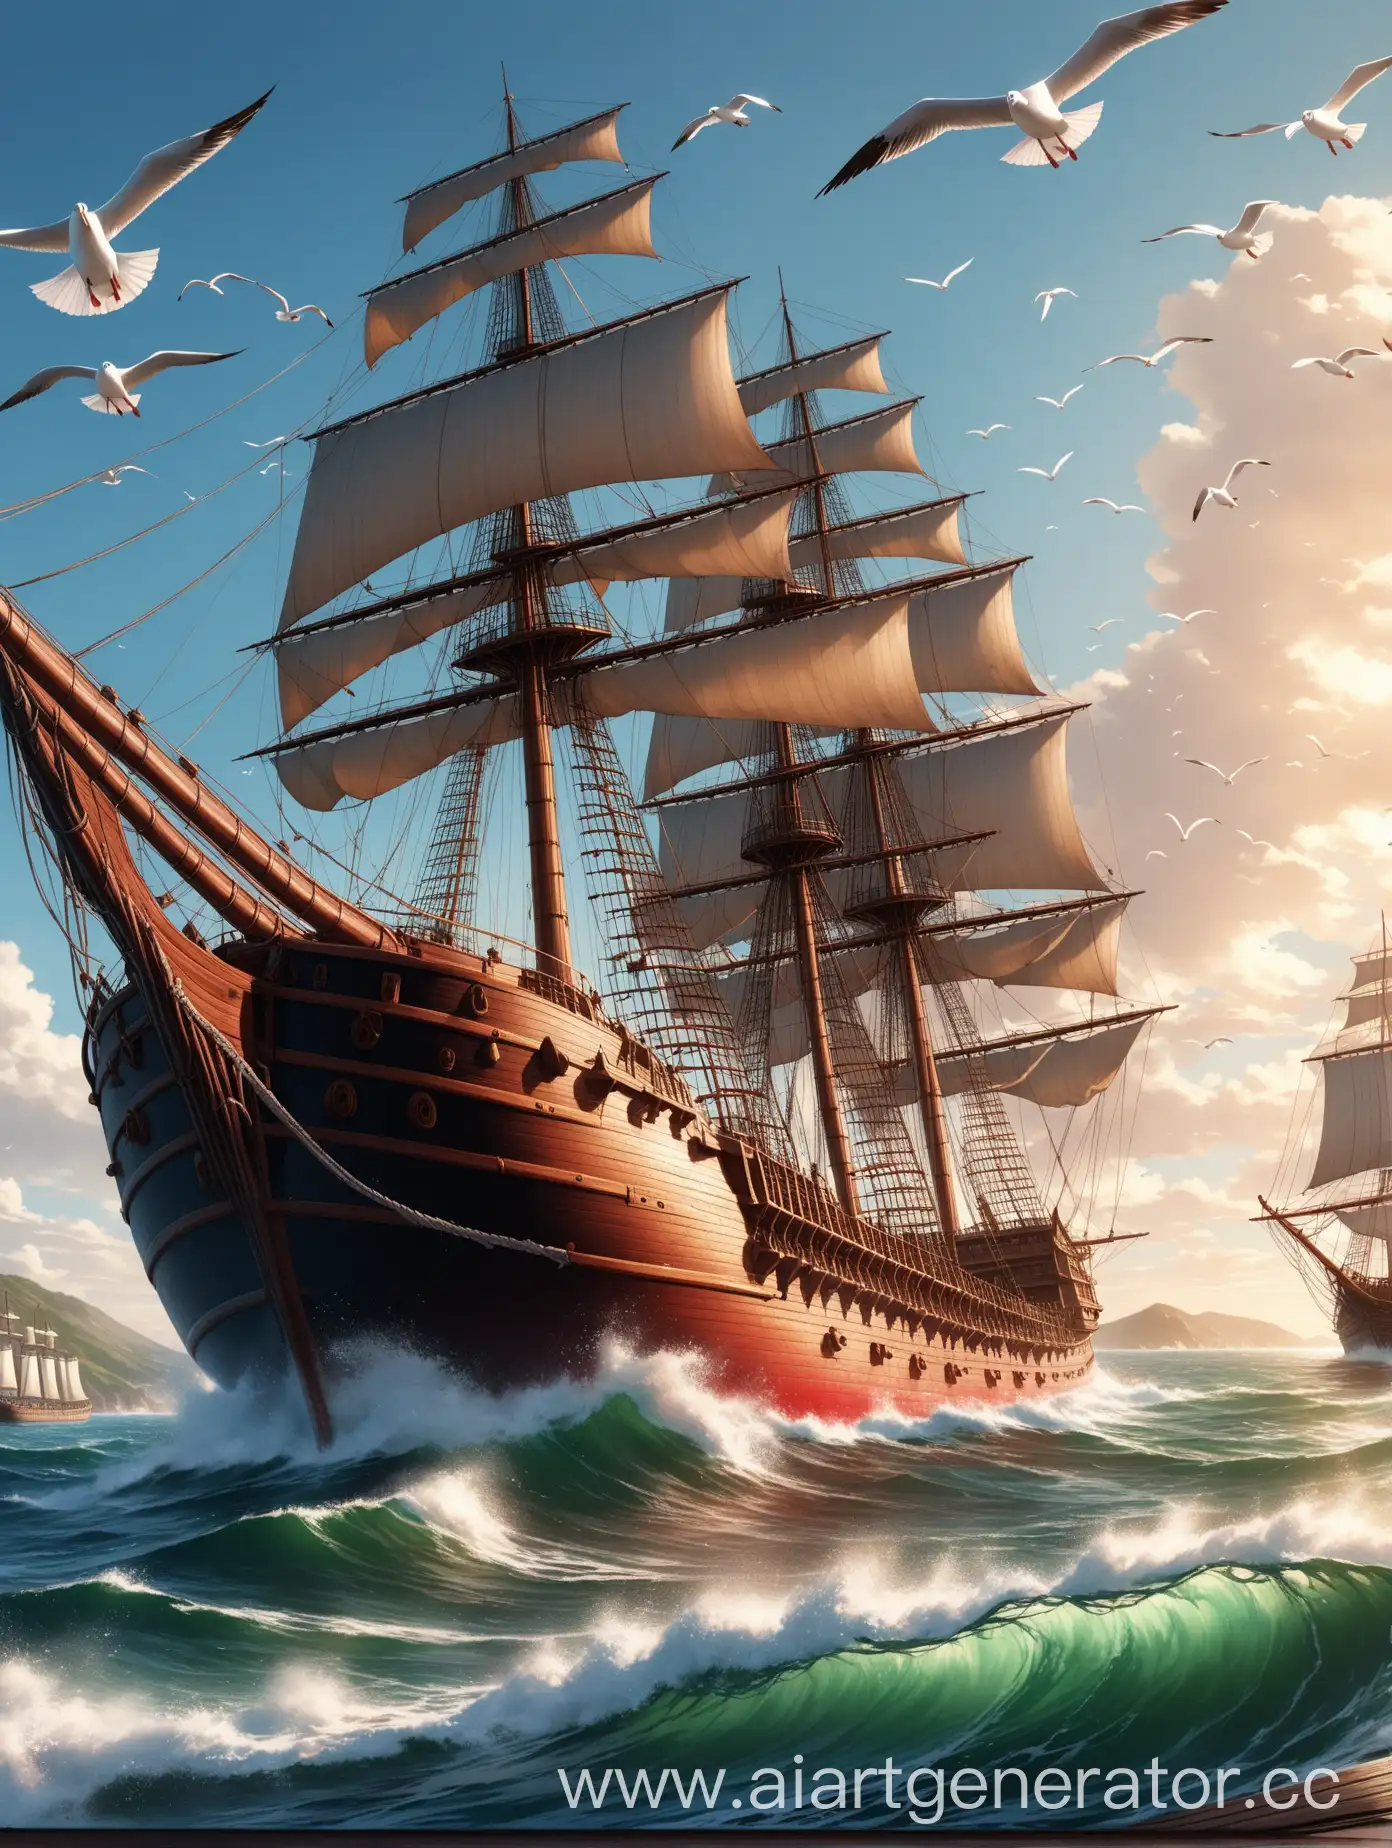 Detailed-Sailing-Ship-Cover-with-Kraken-and-Seagulls-on-Red-Sea